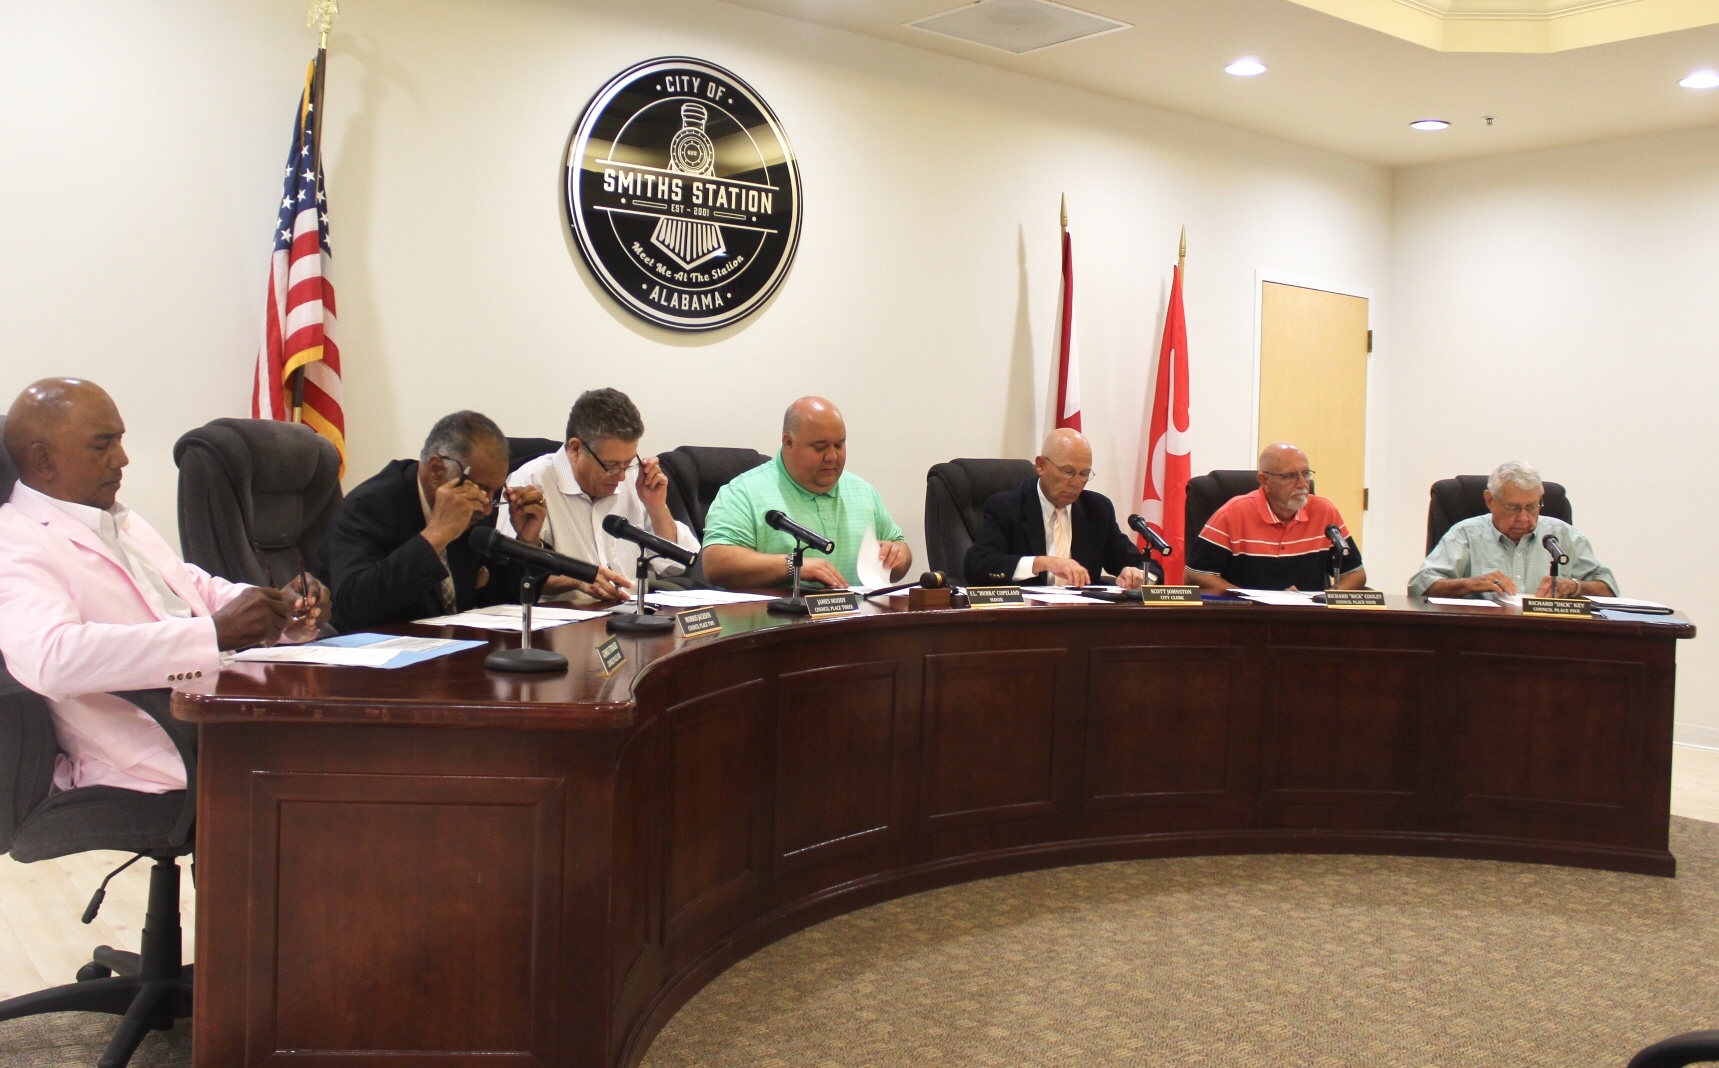 Smiths Station City Council discuss future opening of Jones Store Museum